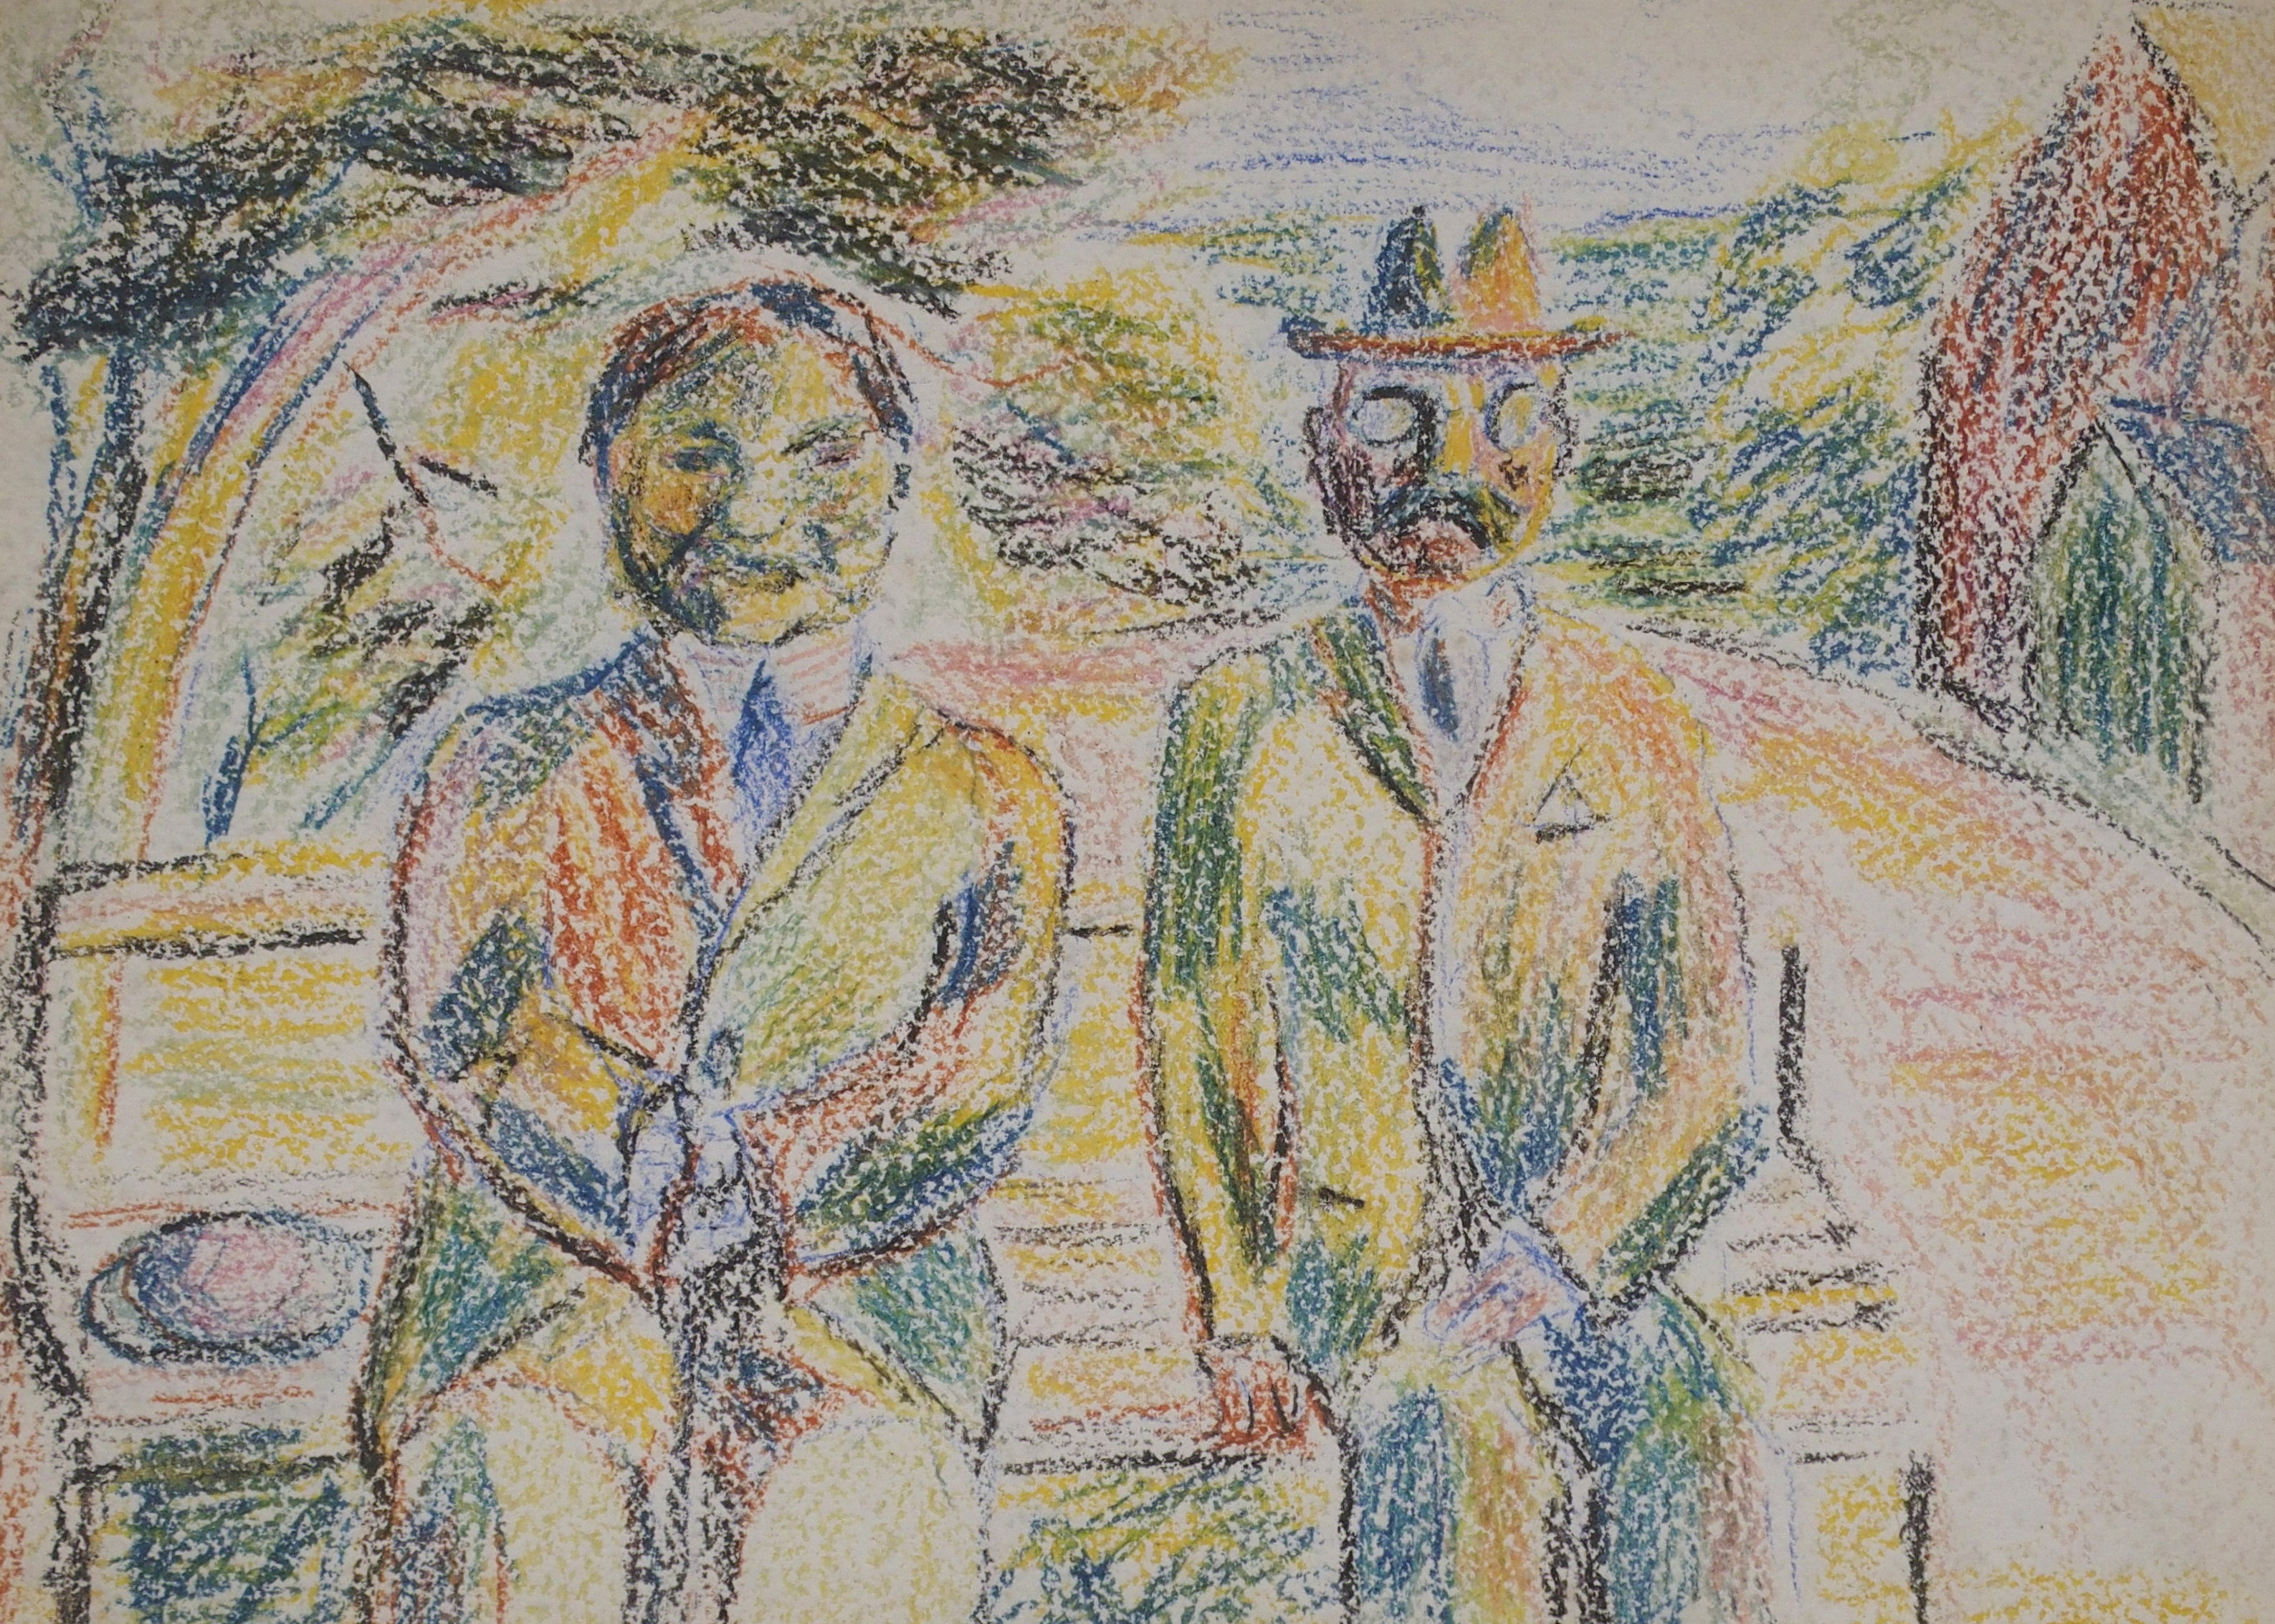 •DONALD BAIN (SCOTTISH 1904-1979) TWO MEN IN SUITS SITTING ON A BENCH Coloured wax crayon, 28 x 38cm